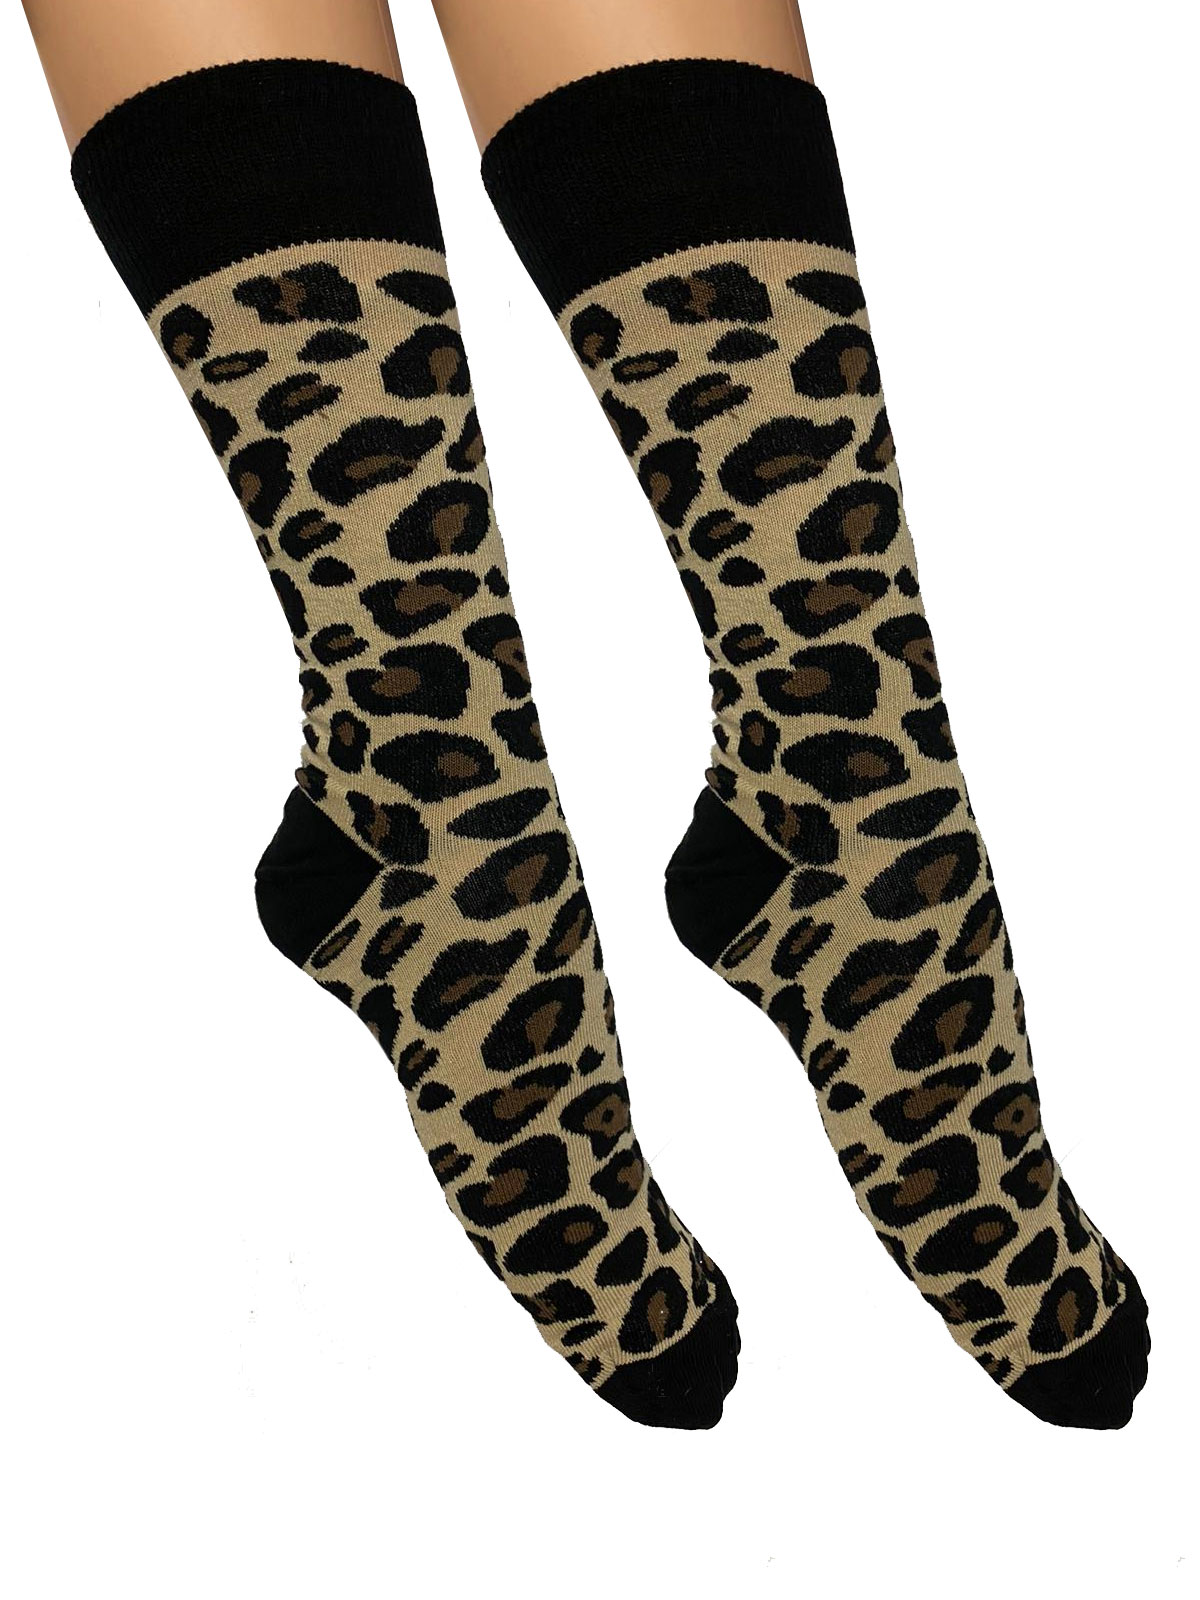 Crazy Chick 12 Pairs Leopard Print Ankle High Socks